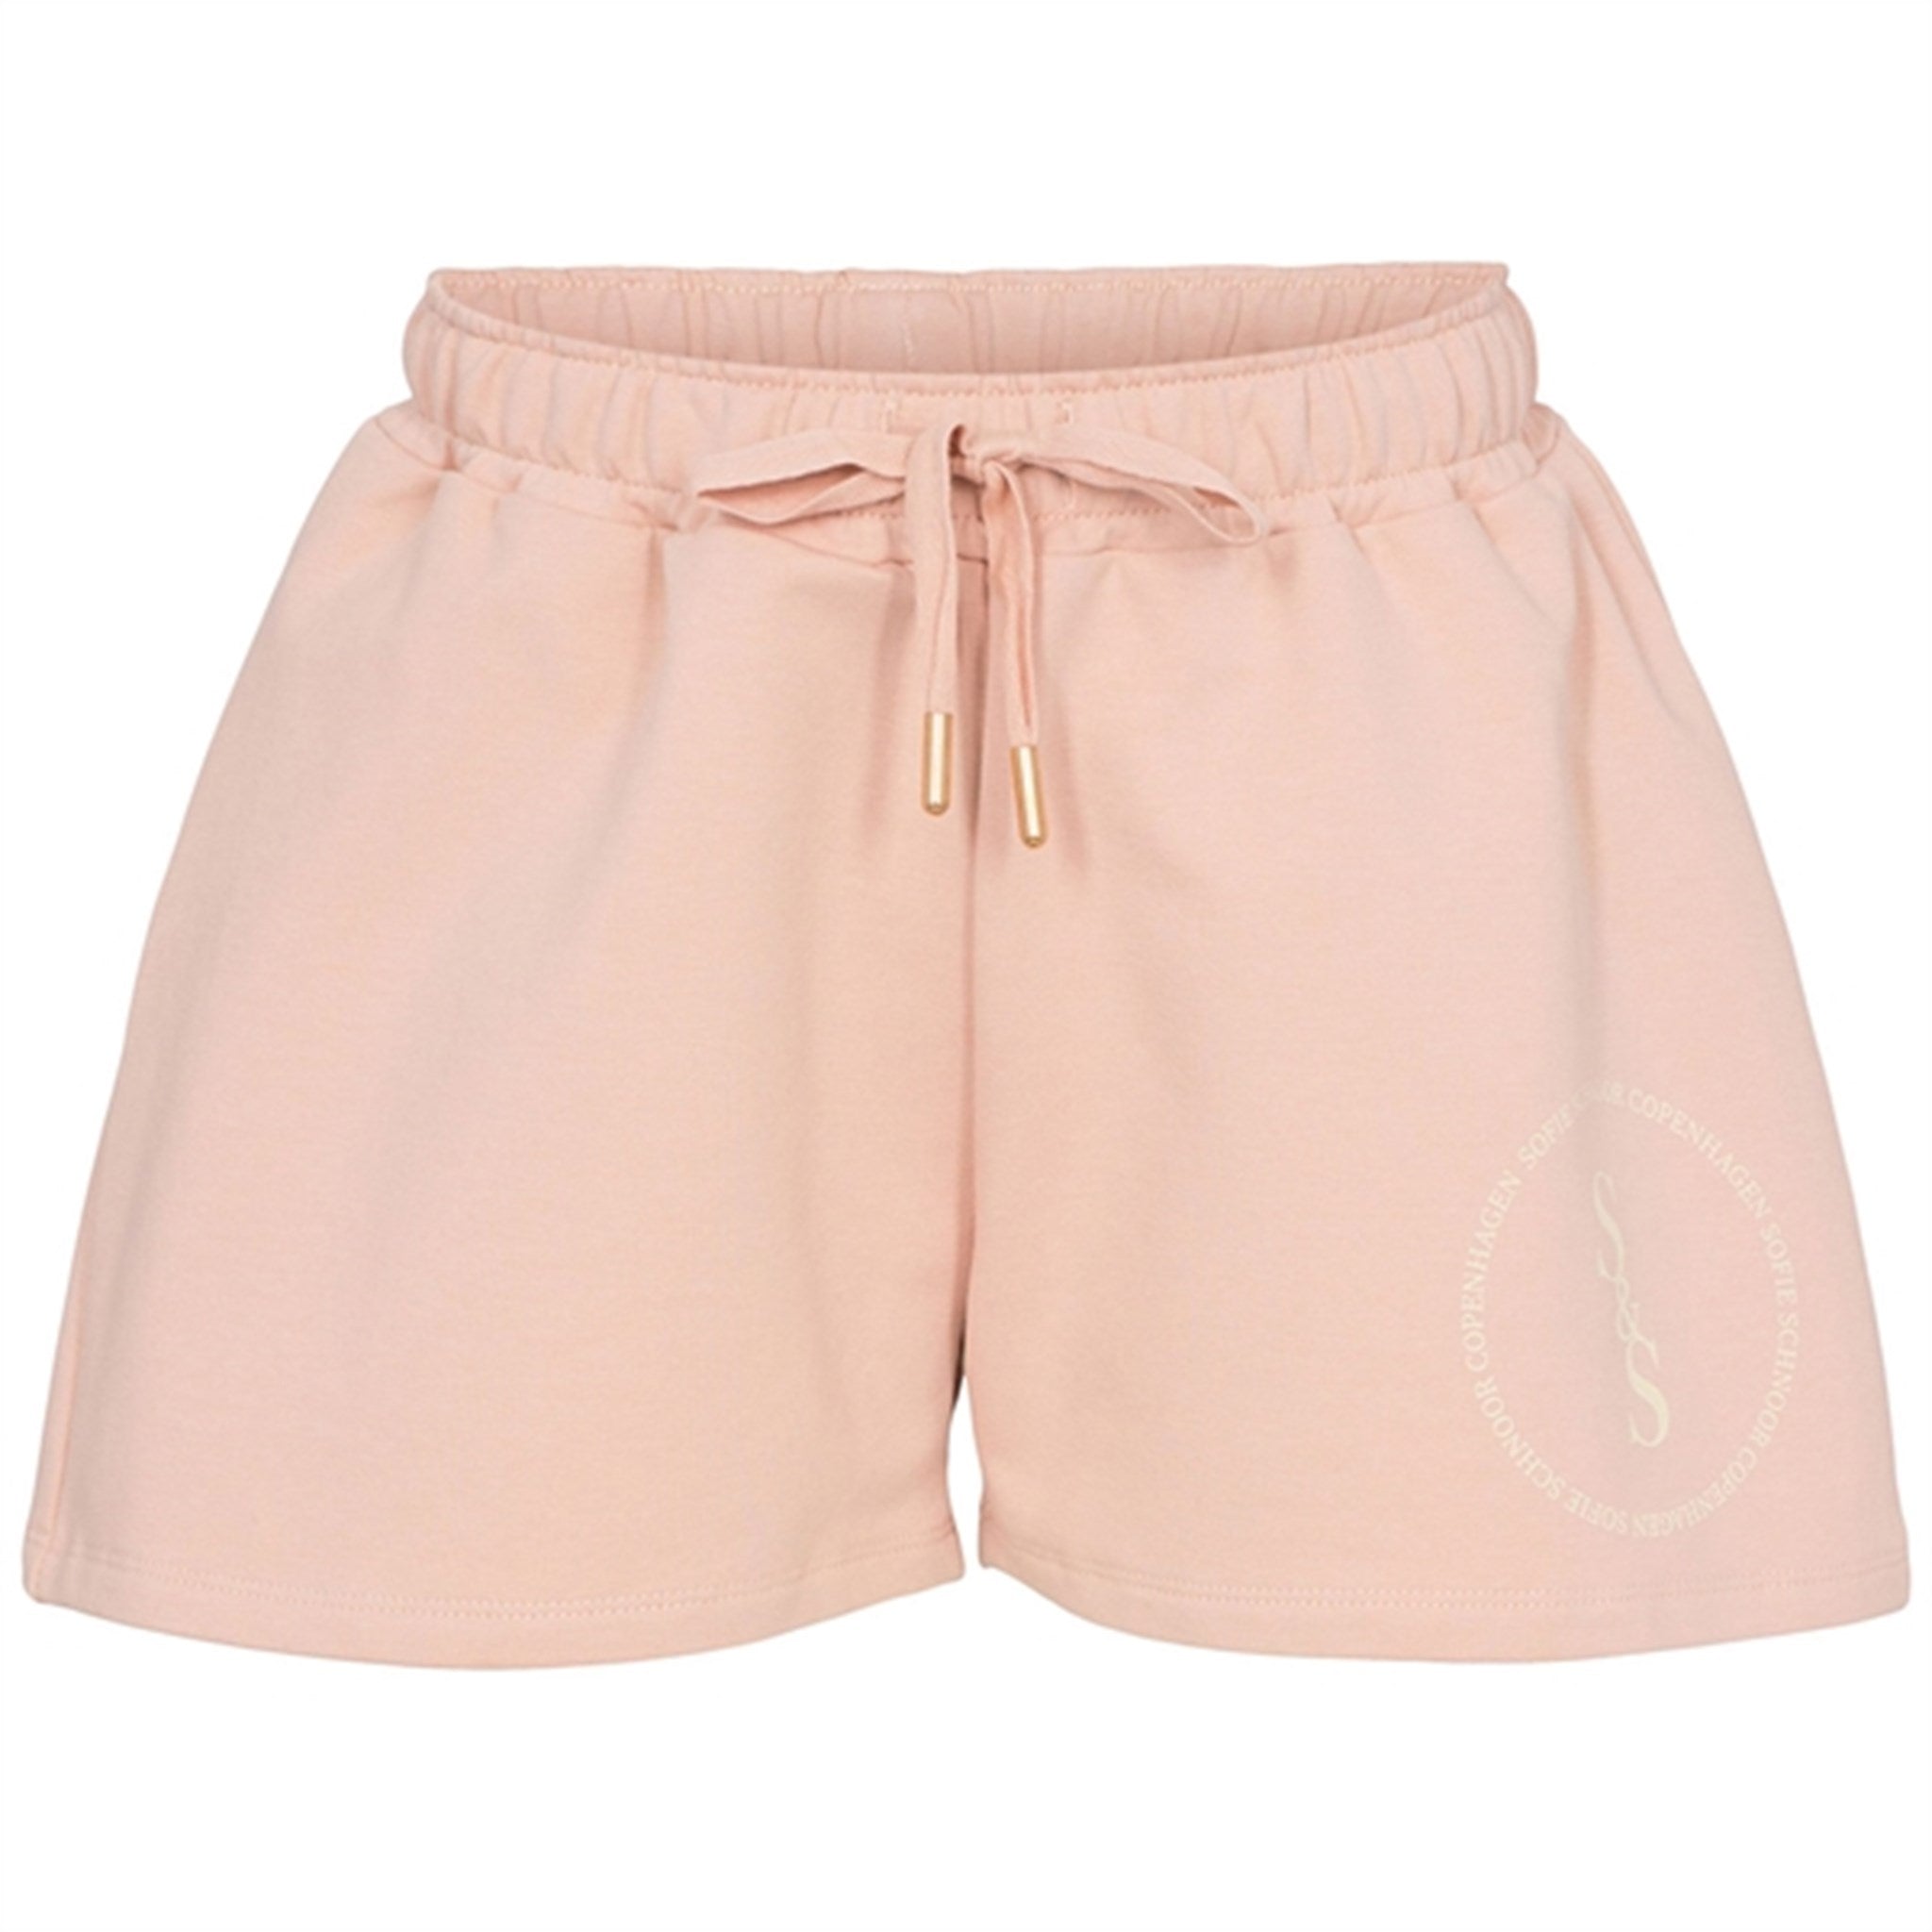 Sofie Schnoor Young Light Rose Shorts